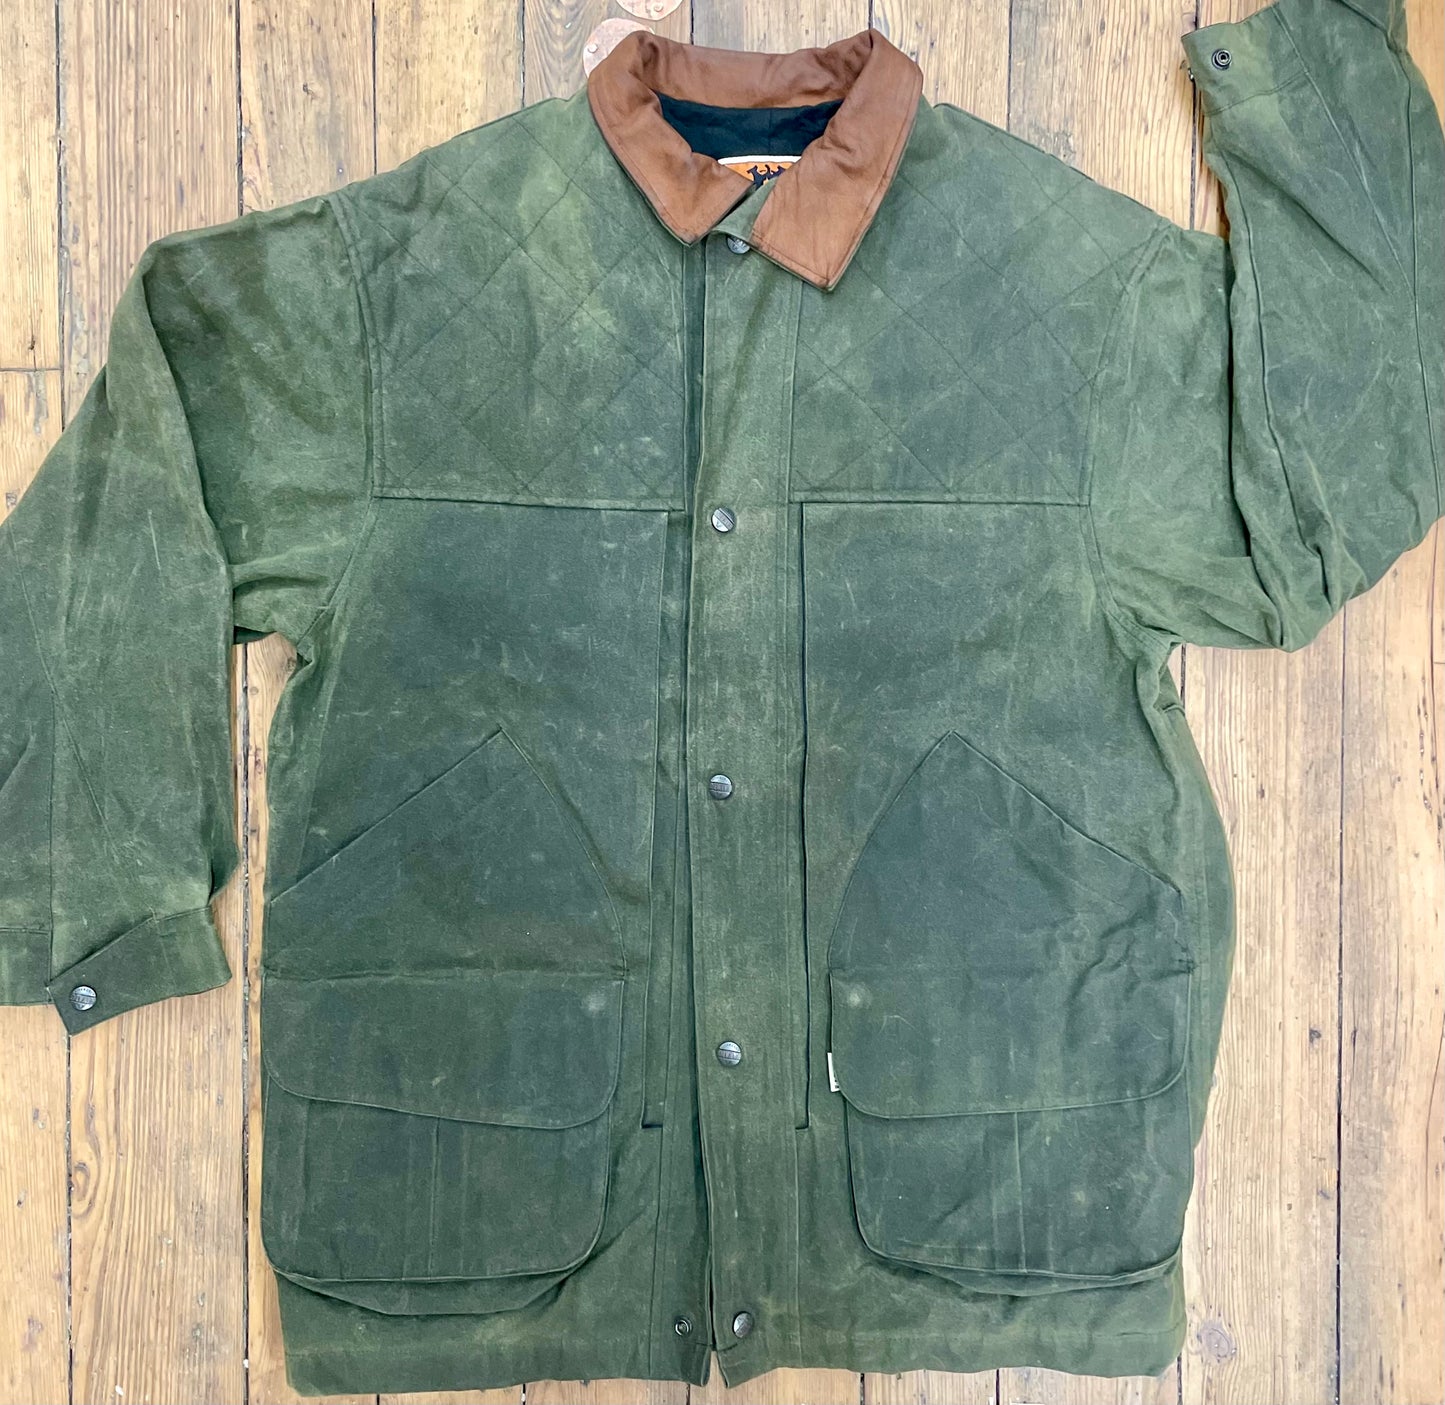 Green waxed canvas jacket with leather collar from Australian brand. 